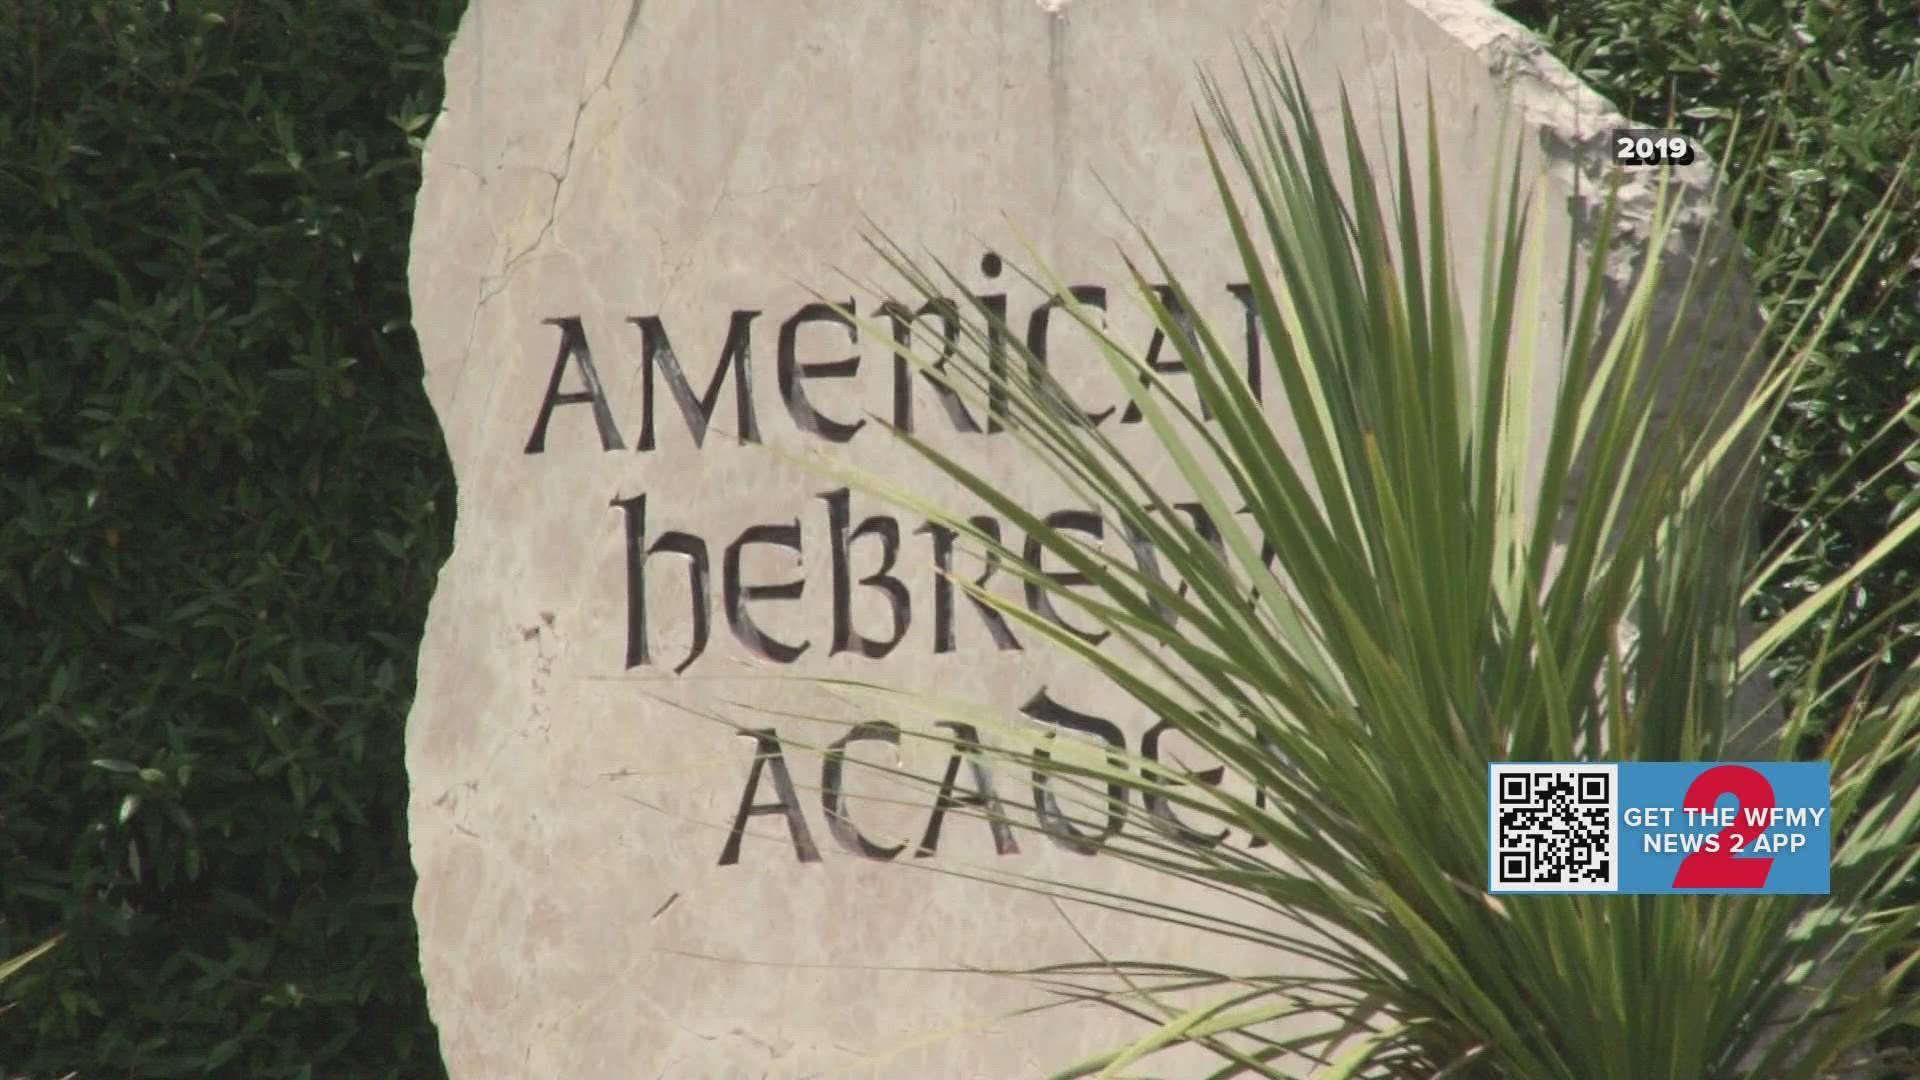 The American Hebrew Academy closed down in 2019 because of "insufficient growth in enrollment."